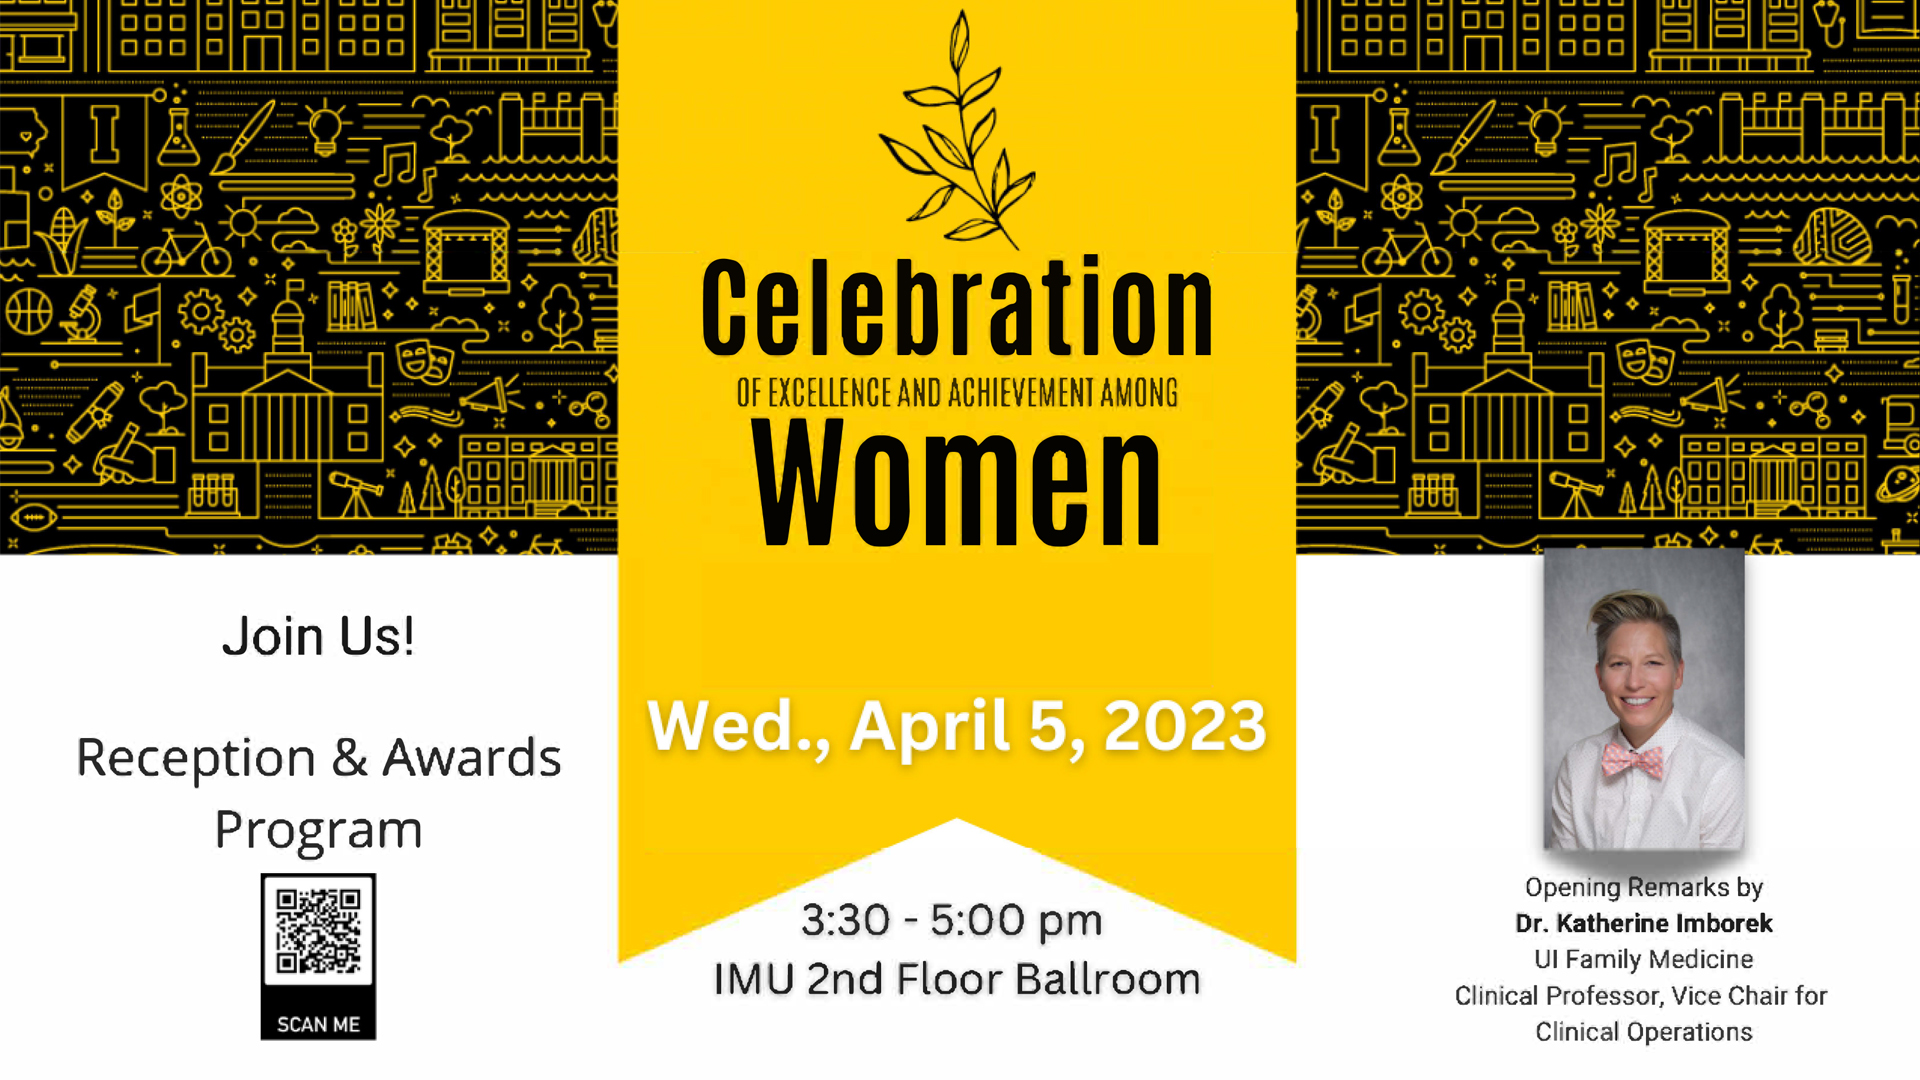 Celebration for Excellence and Achievement Among Women, Wed April 5, 3:30-5:00 pm